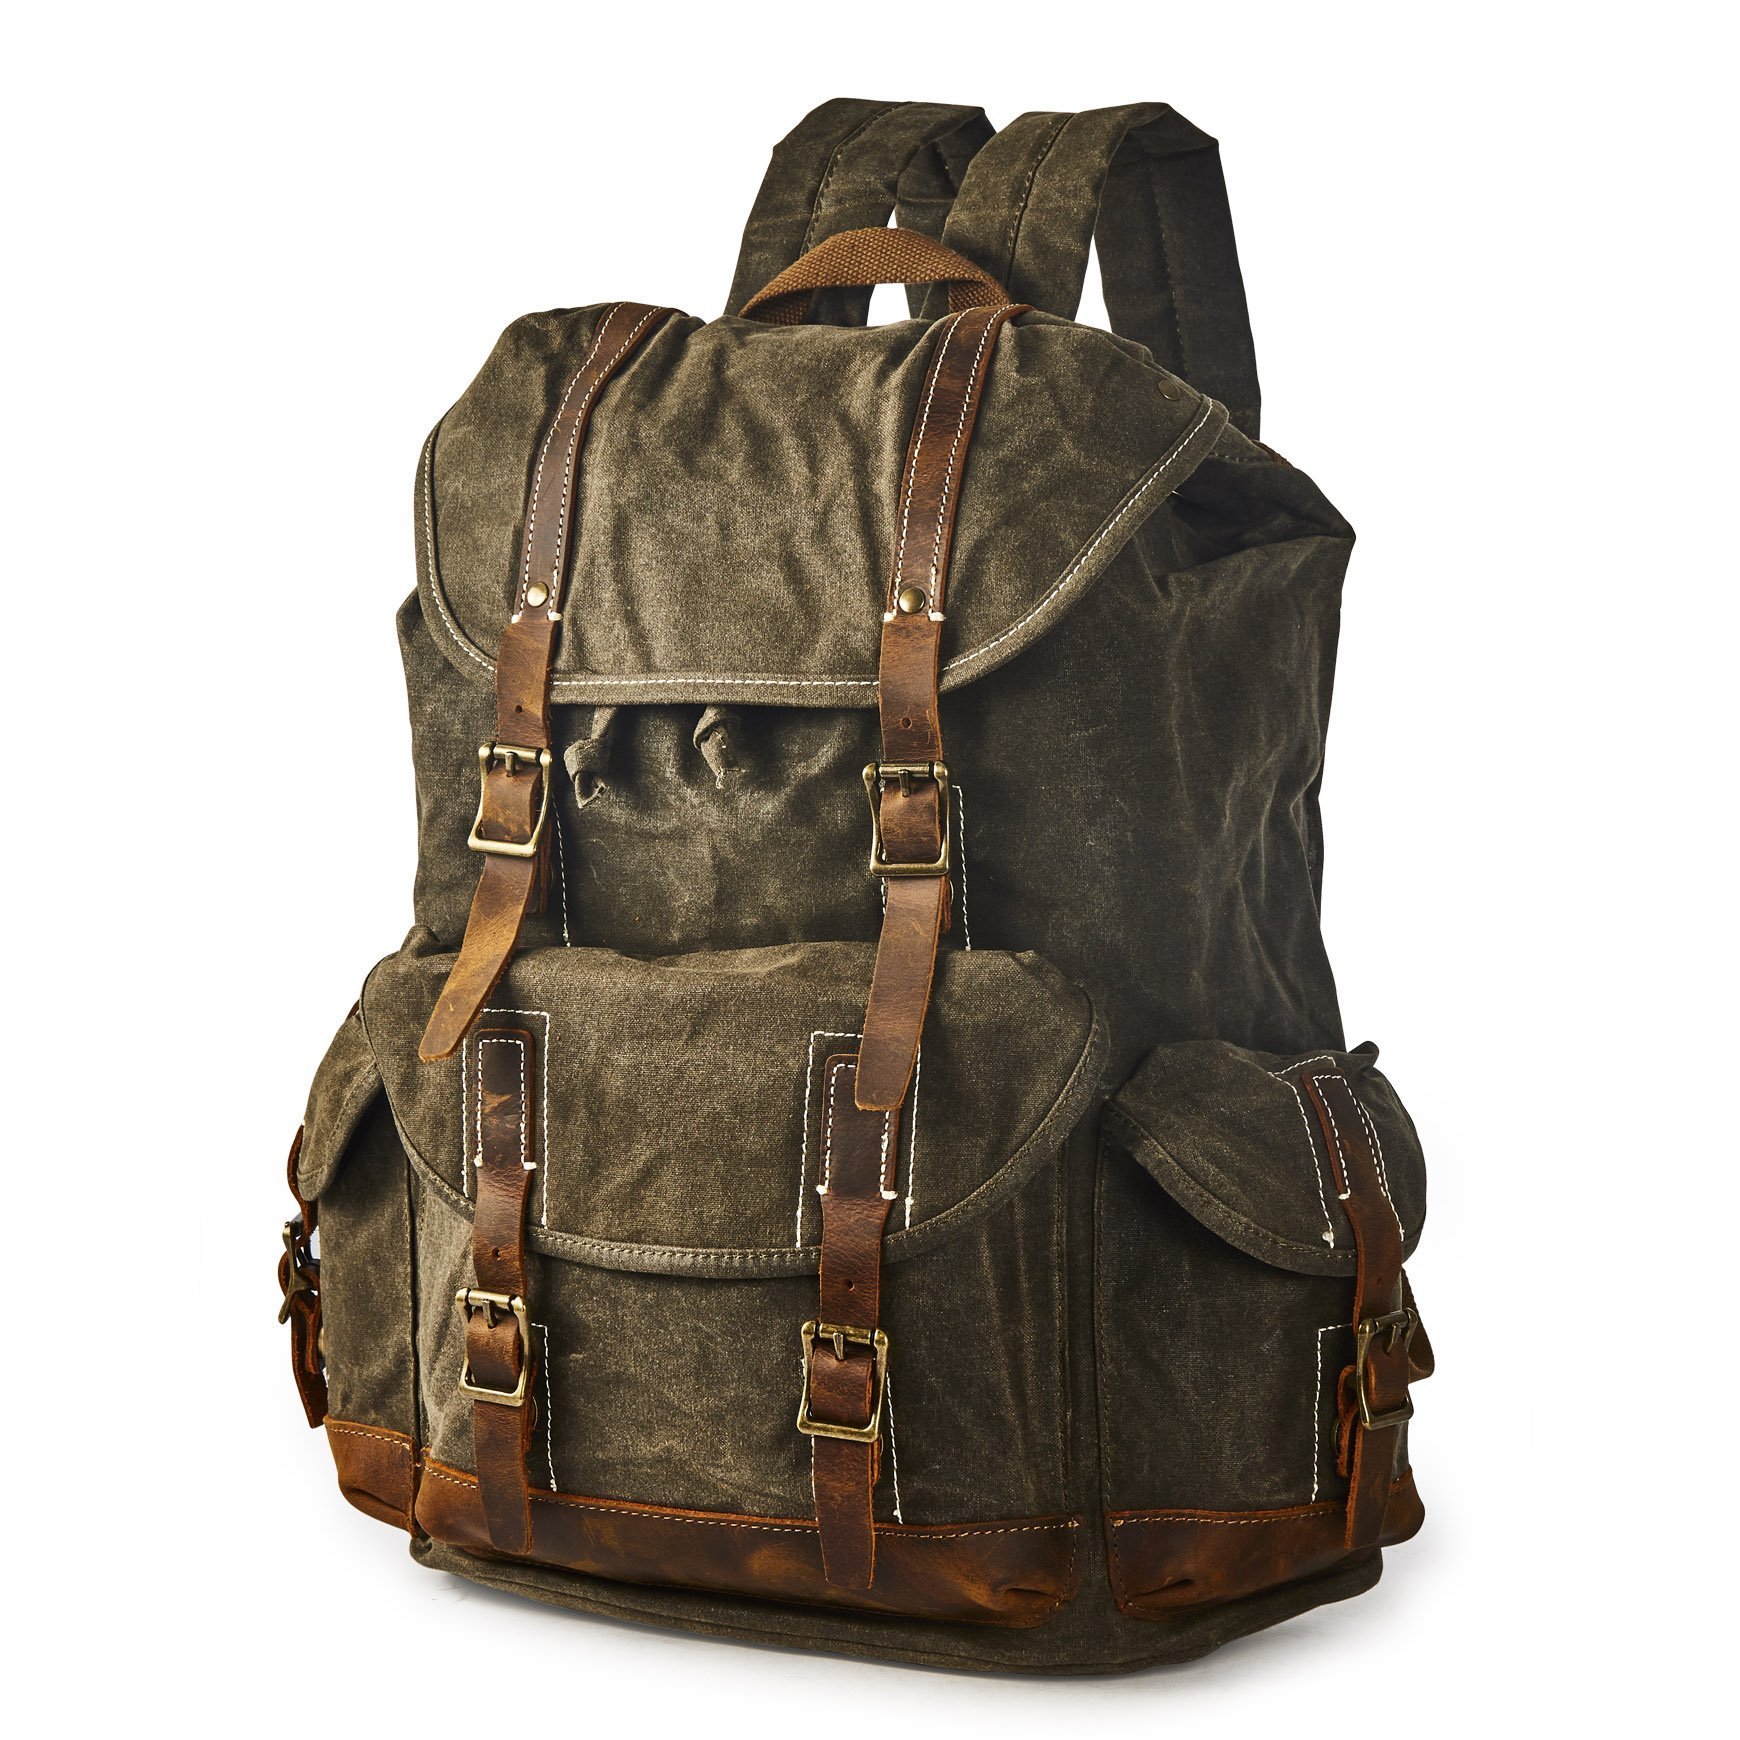 BRASS TACKS Leathercraft Heavy Duty Waxed Canvas Vintage Backpack for Men Women Trim Casual 15.6" laptop Travel Rucksack Shoulde